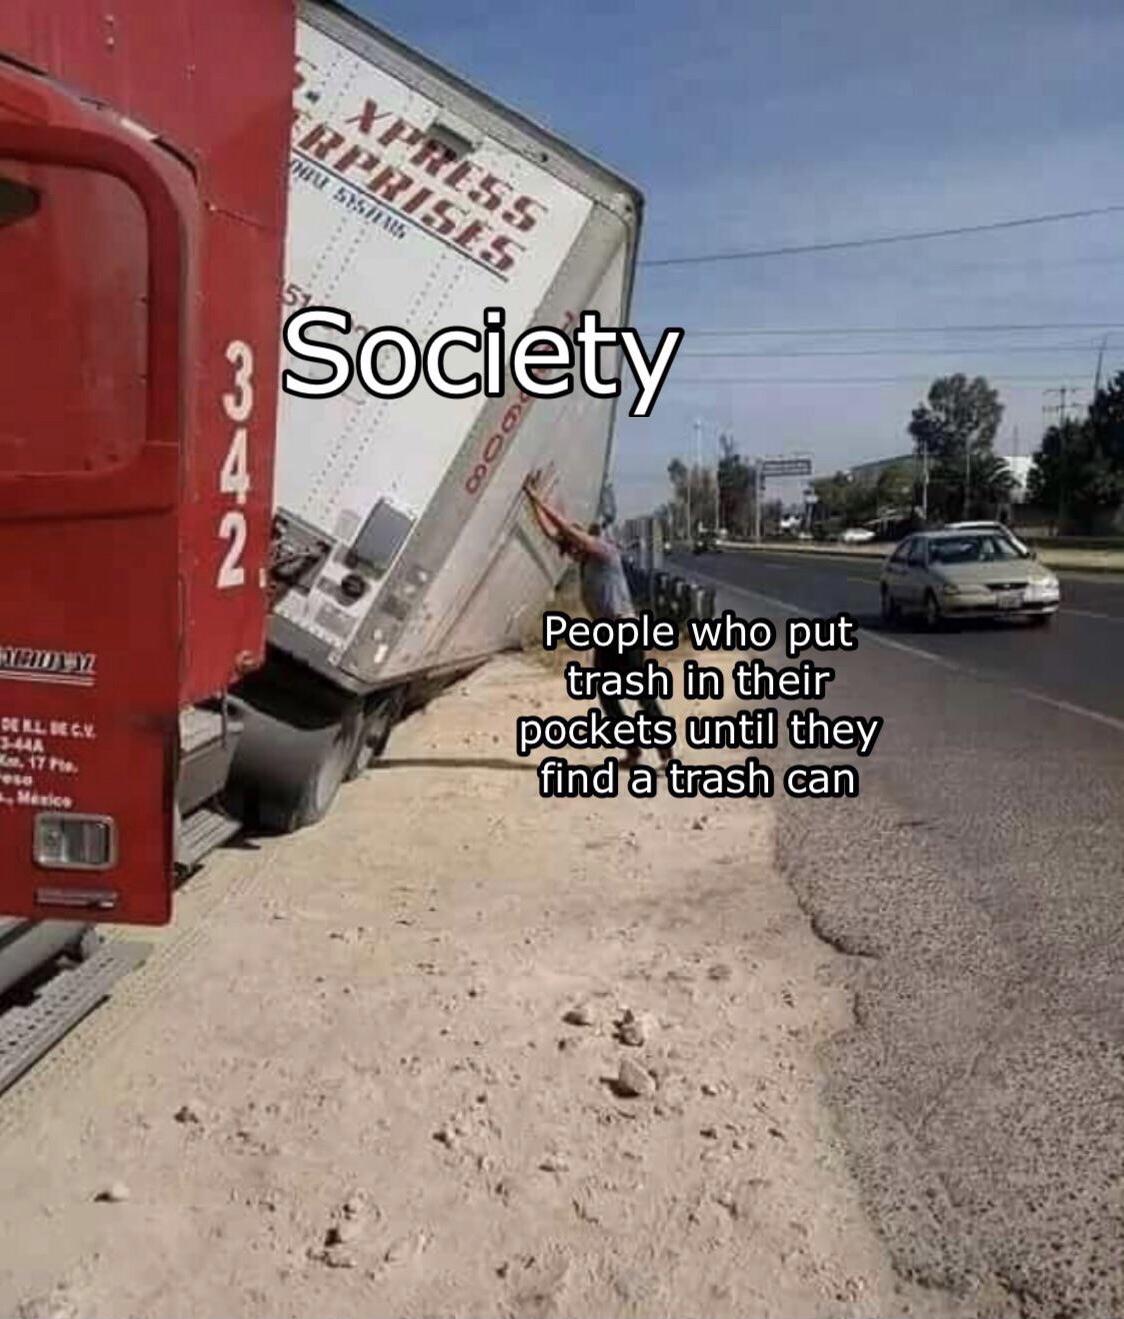 funny gaming memes - society people who put trash in thier pockets meme - Xpress Trprises U 5Strus 3 Society 2 Od People who put trash in their pockets until they find a trash can Bell Beck 34A . 17 Mexico